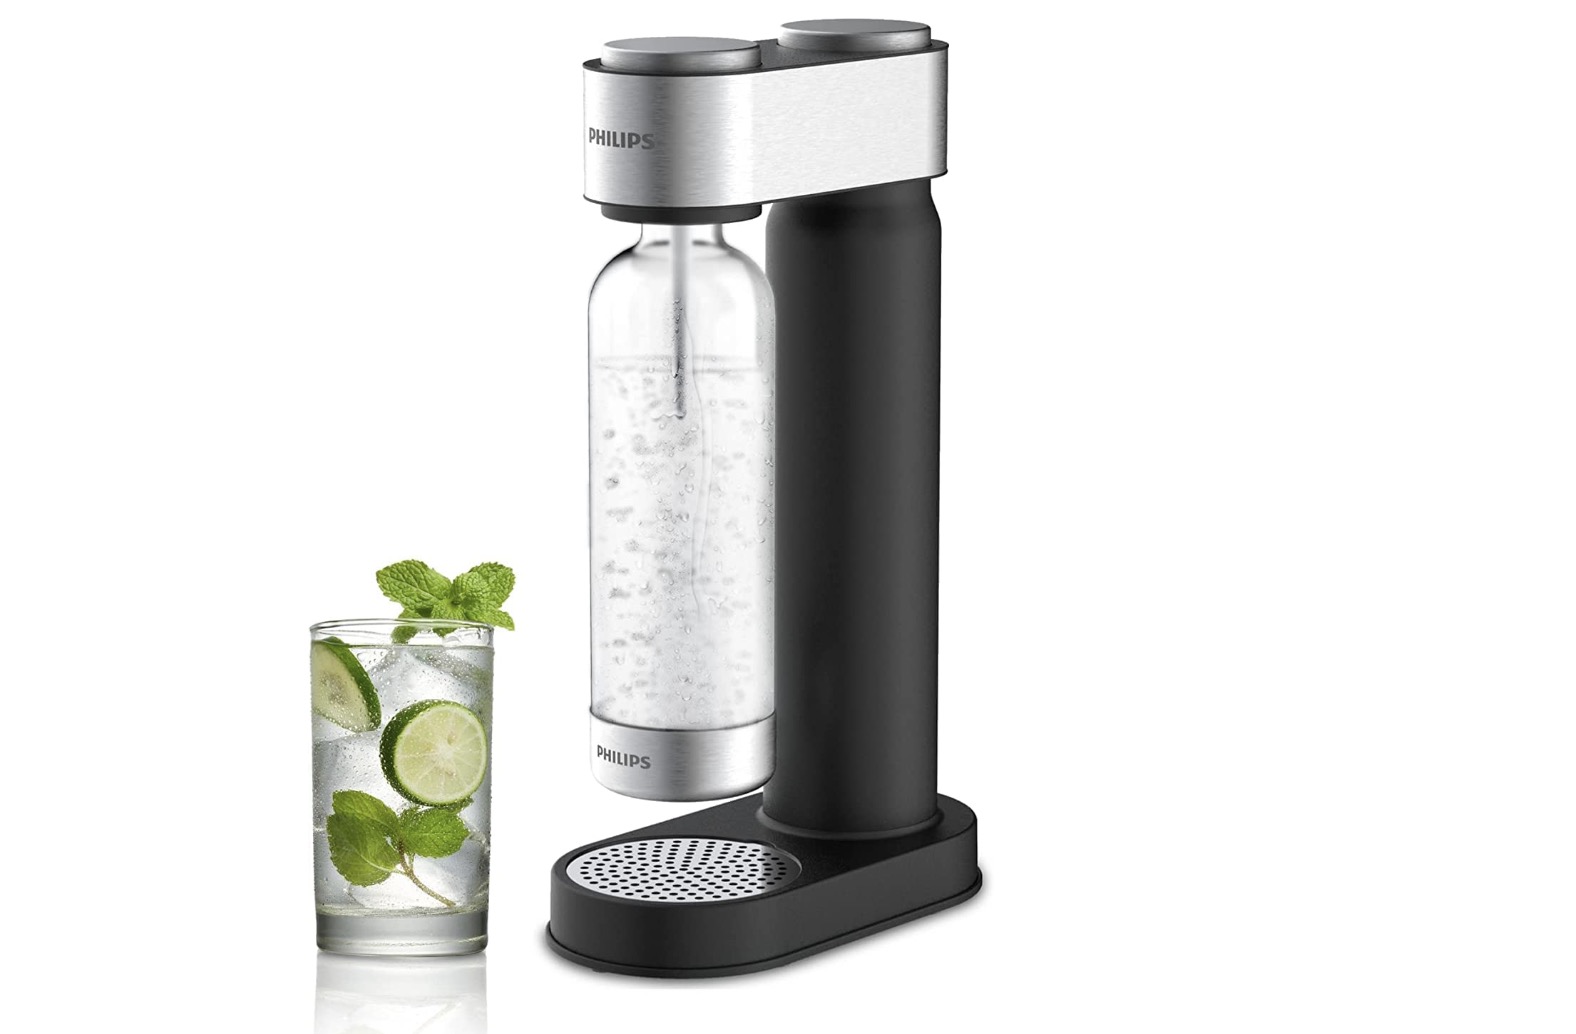 PHILIPS Sparkling Water Maker Soda Maker Soda Streaming Machine for Carbonating with 1L Carbonating Bottle, Seltzer Fizzy Water Maker, Compatible with Any...
